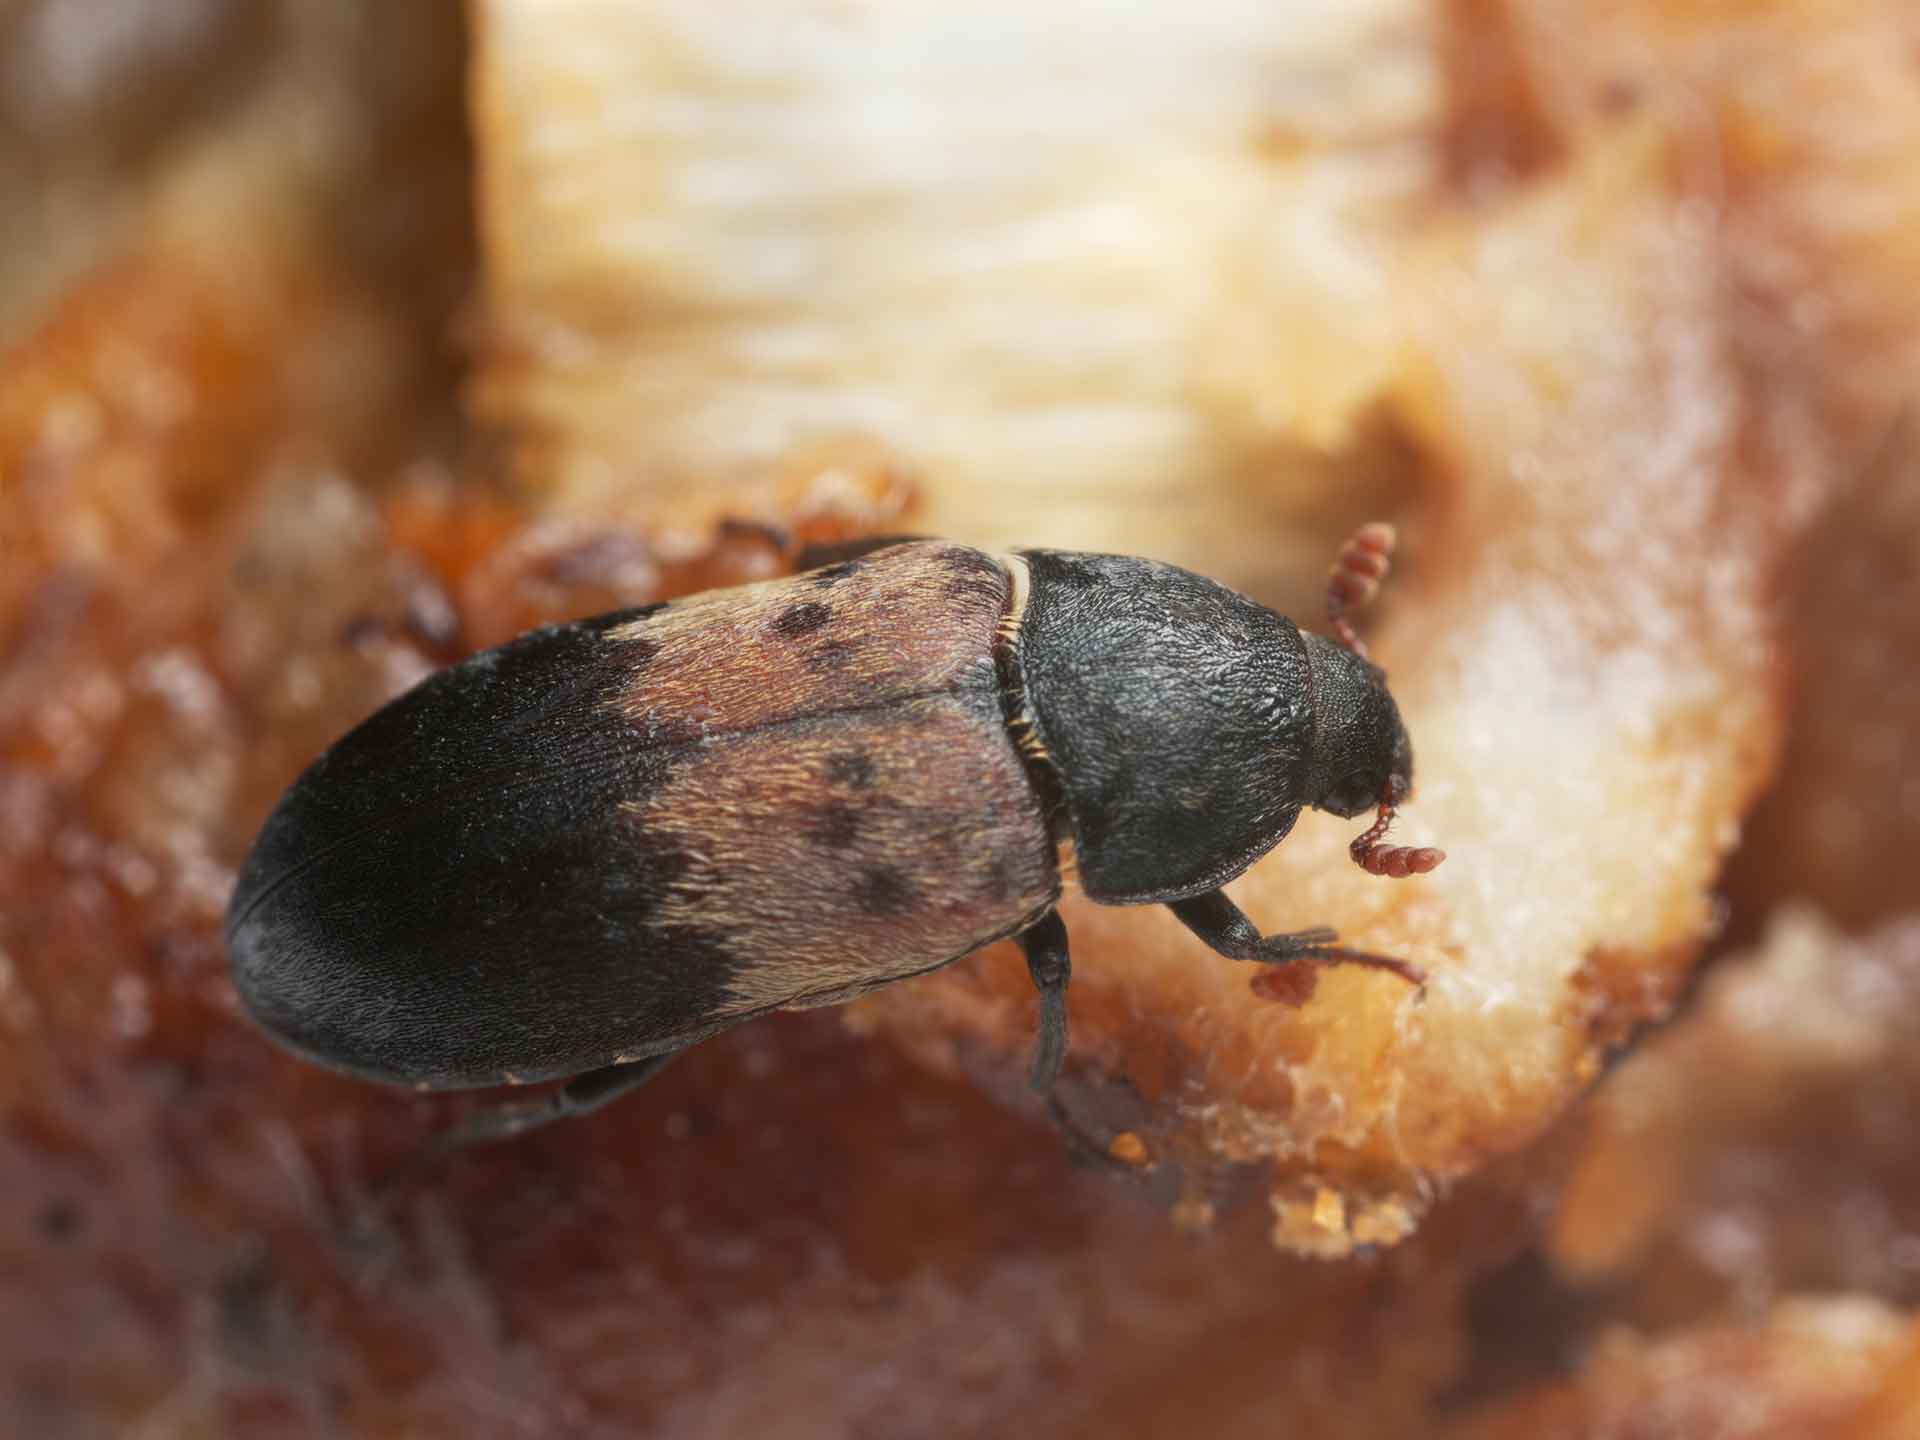 Larder beetle, Dermestes ladarius on meat, this beetle can be a pest on animal products, forensic entomology